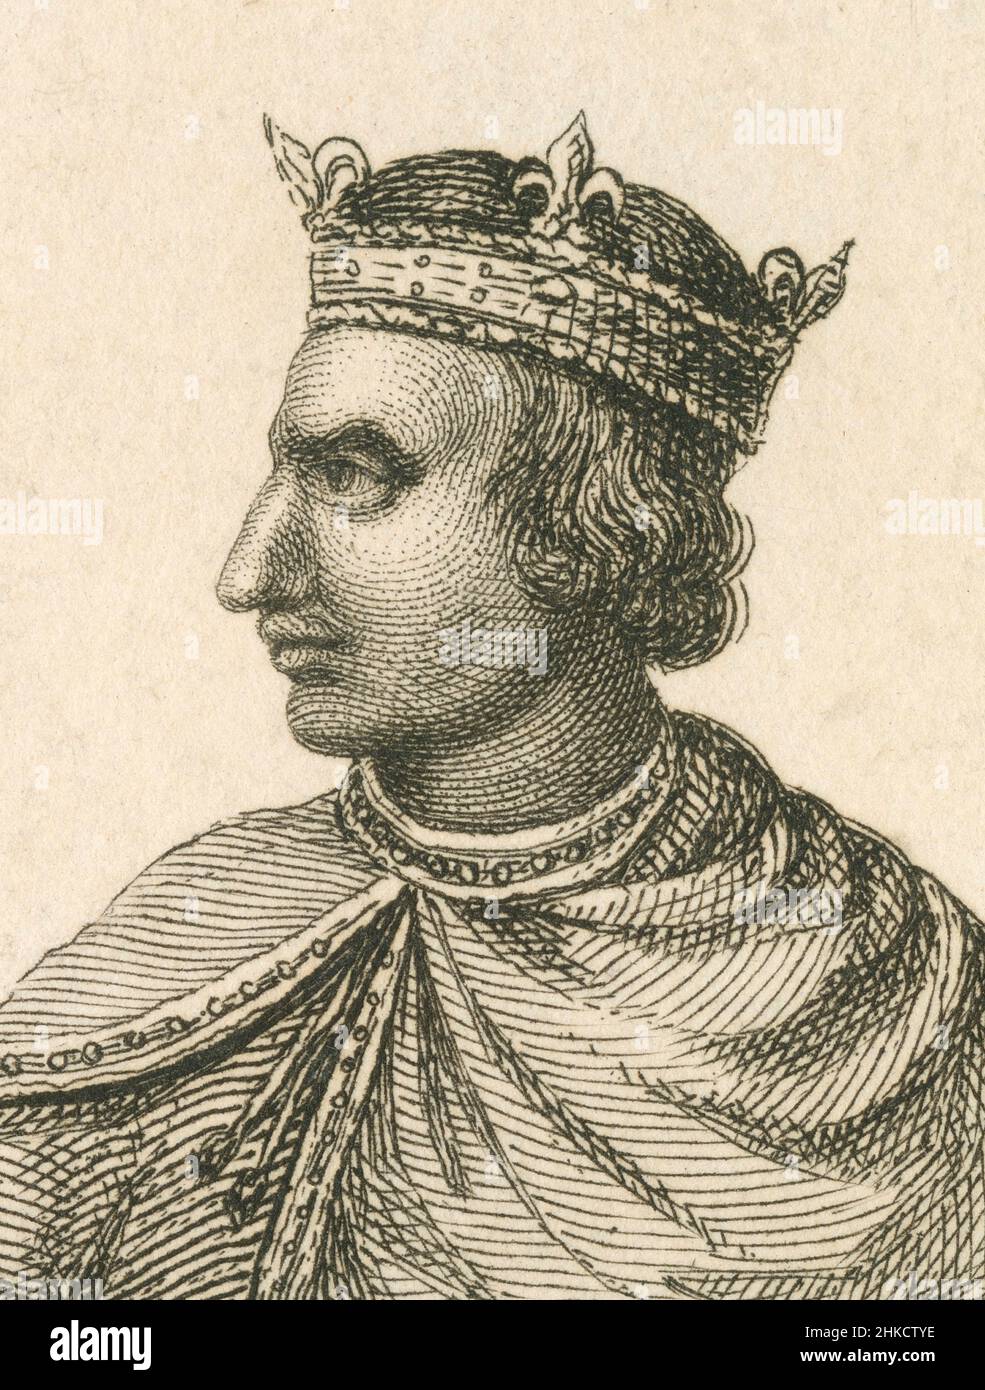 Antique circa 1812 etching of Henry I of England. Henry I (c1068-1135), also known as Henry Beauclerc, was King of England from 1100 to his death in 1135. SOURCE: ORIGINAL ETCHING Stock Photo